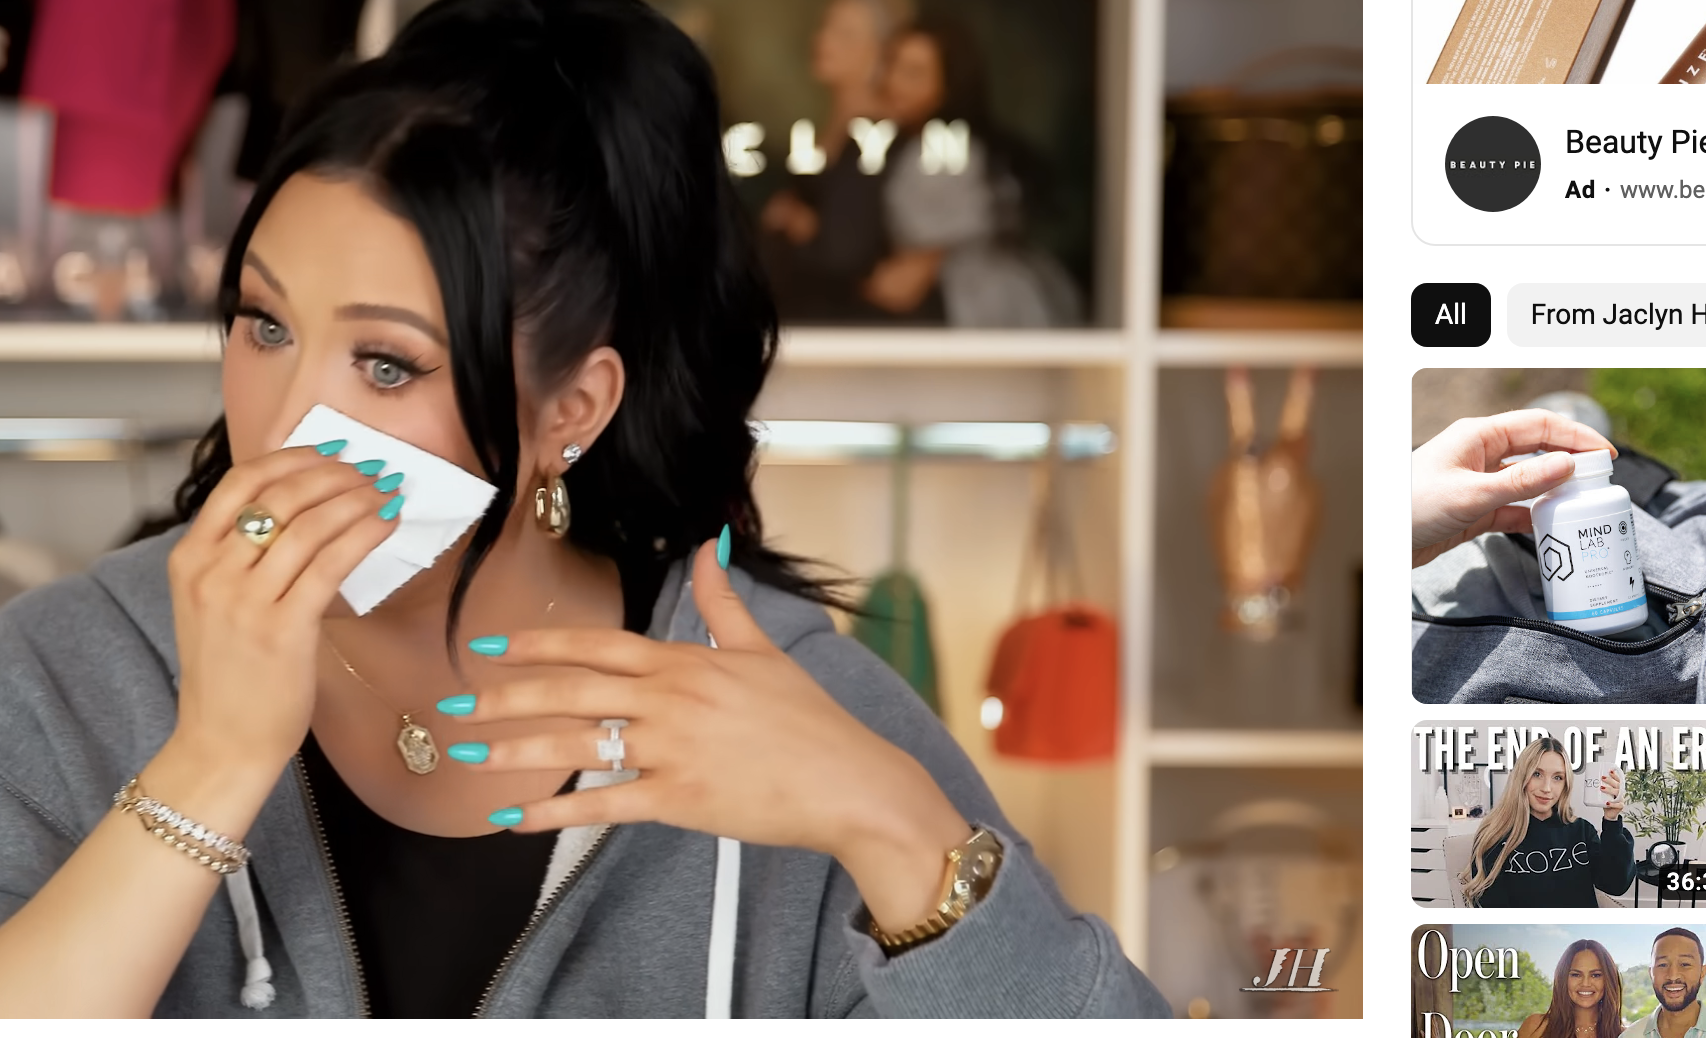 Jaclyn Hill crying and wiping her tears with tissue